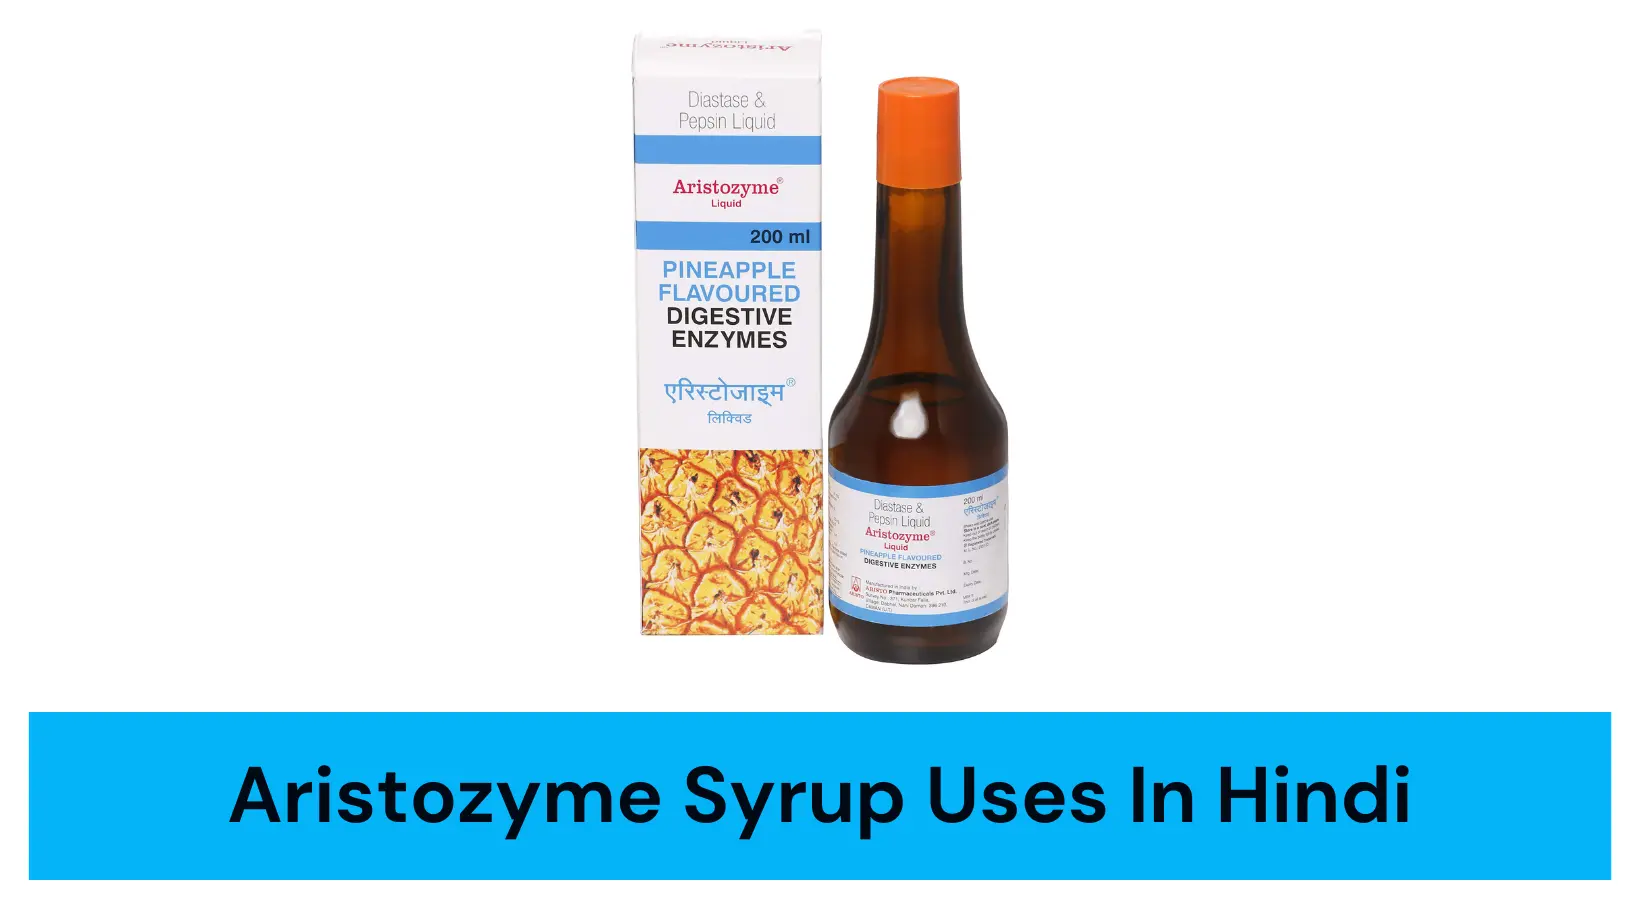 Aristozyme Syrup Uses In Hindi